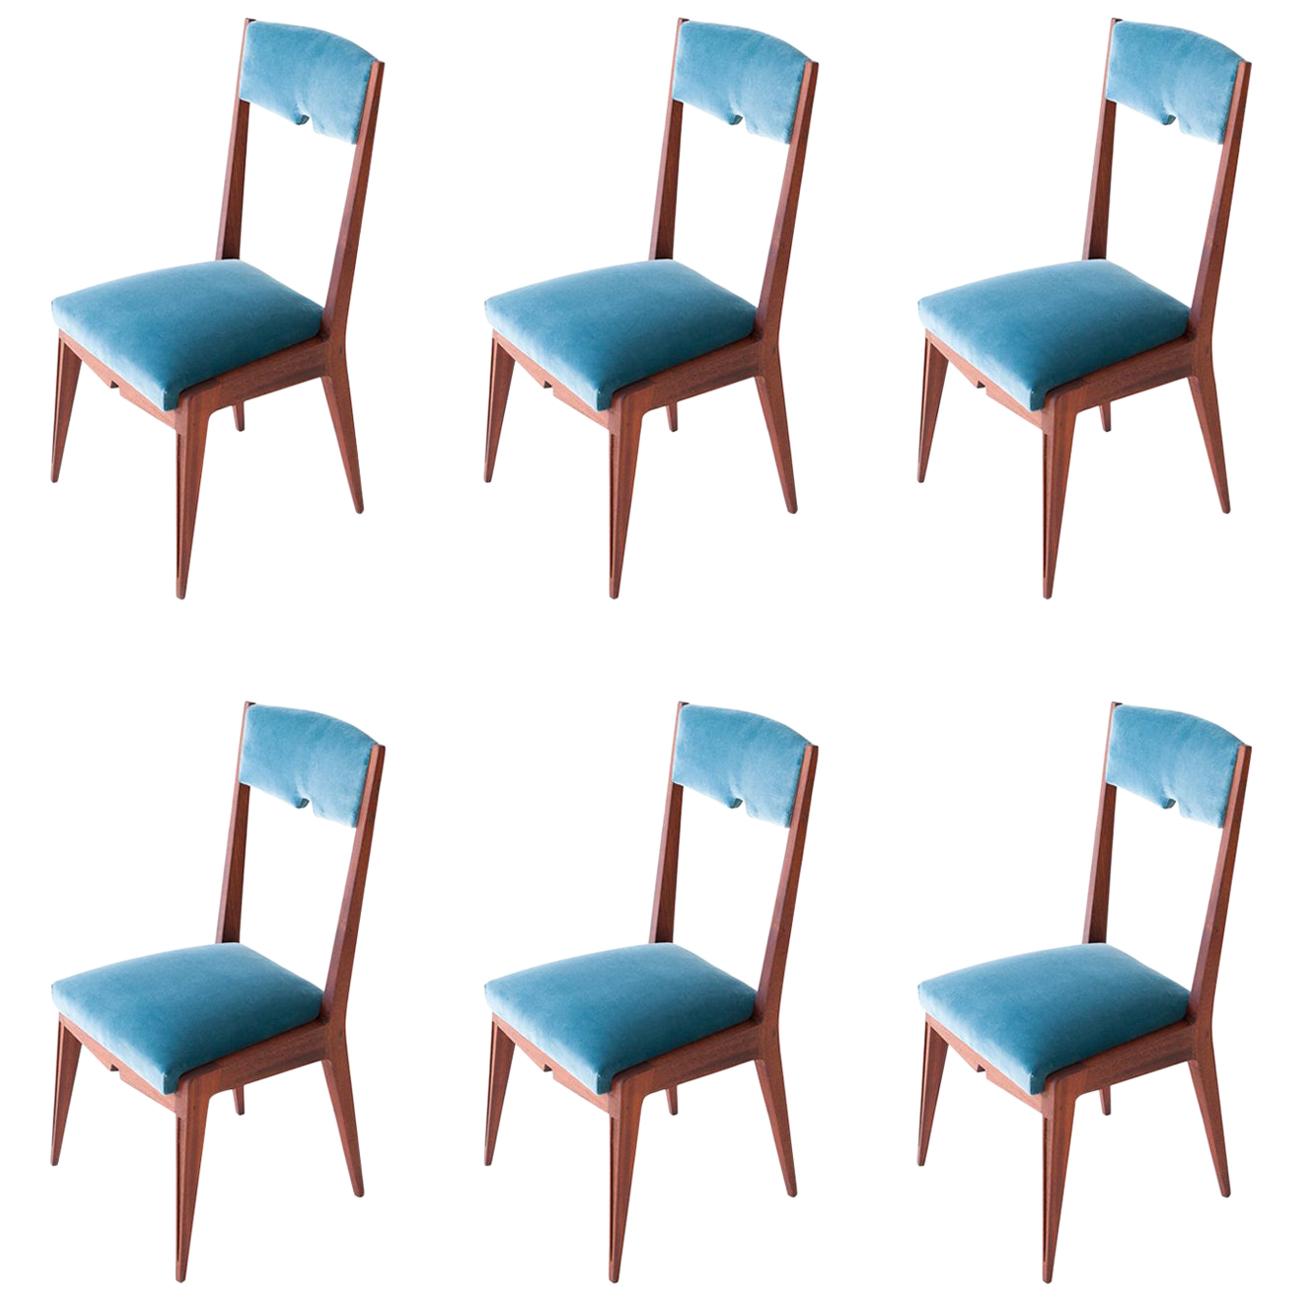 Six Mahogany and Blue Velvet Dining Chairs